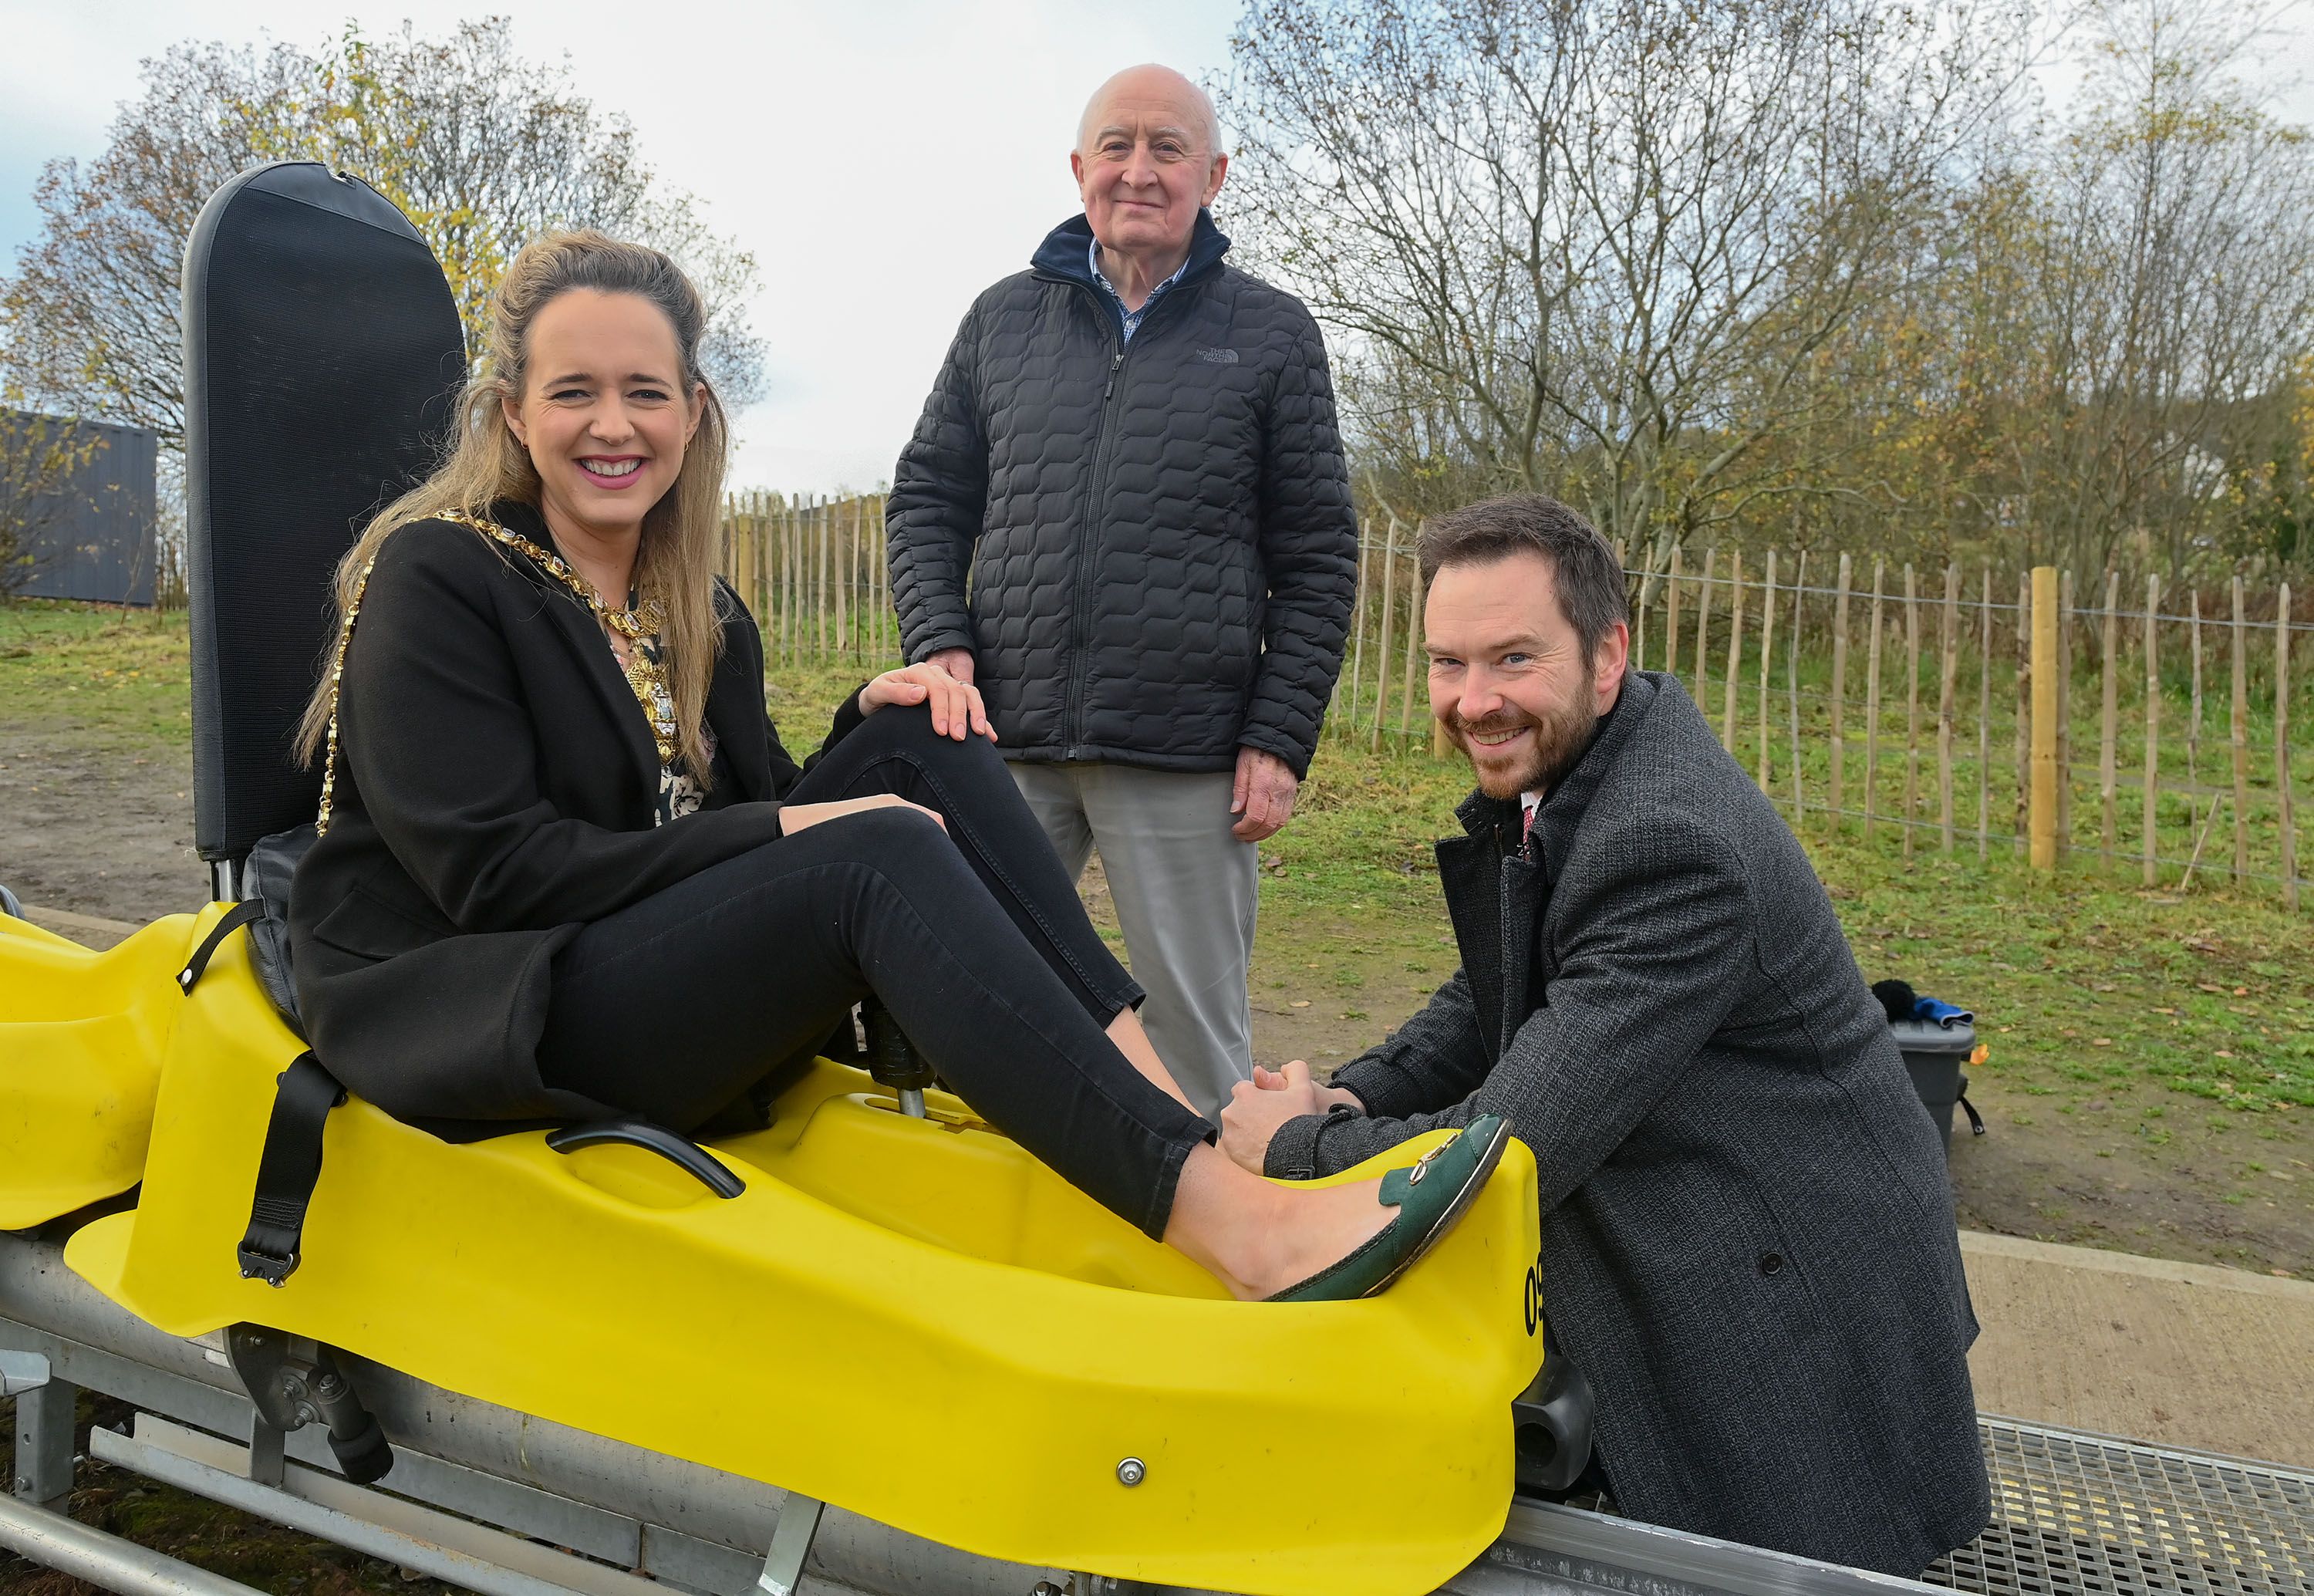 SEAL OF APPROVAL: Belfast Lord Mayor, Councillor Kate Nicholl was joined by David Raymond and Colin O’Neill from Colin Glen Trust at an event to showcase the city’s newest visitor attractions at Colin Glen Forest Park